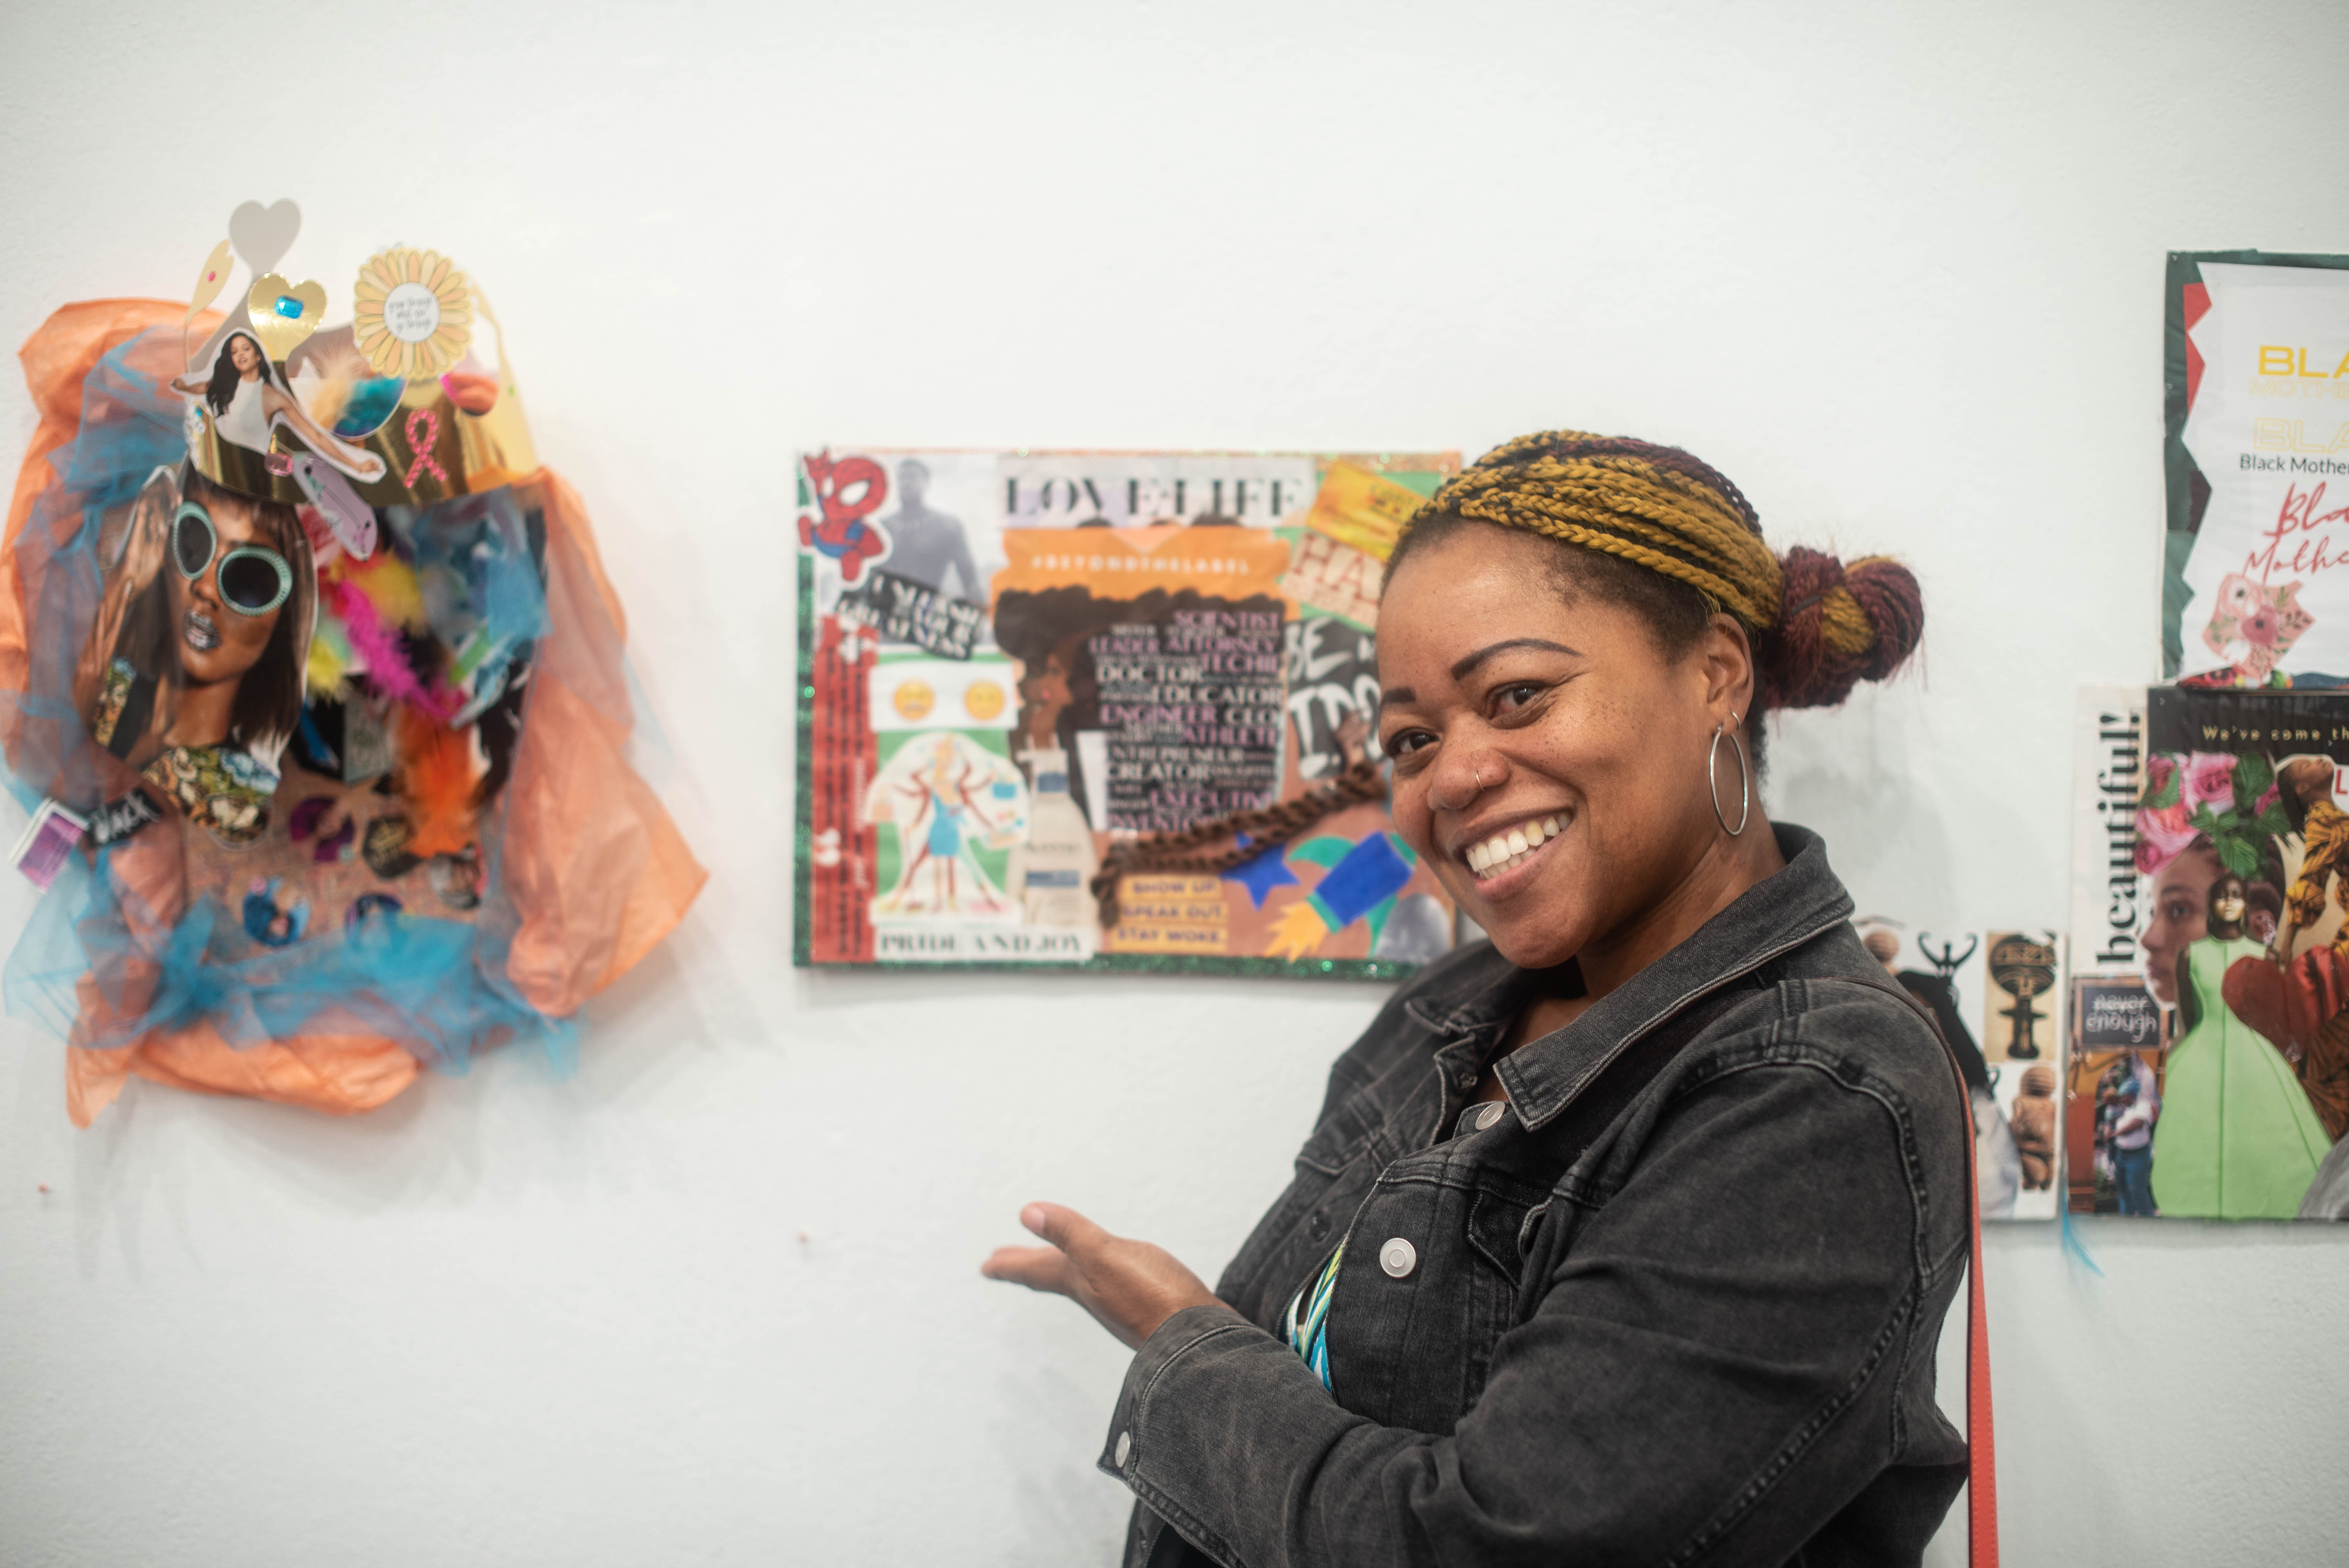 A project participant/artist shows off their work at the And, Ain't I a Mother art exhibition.